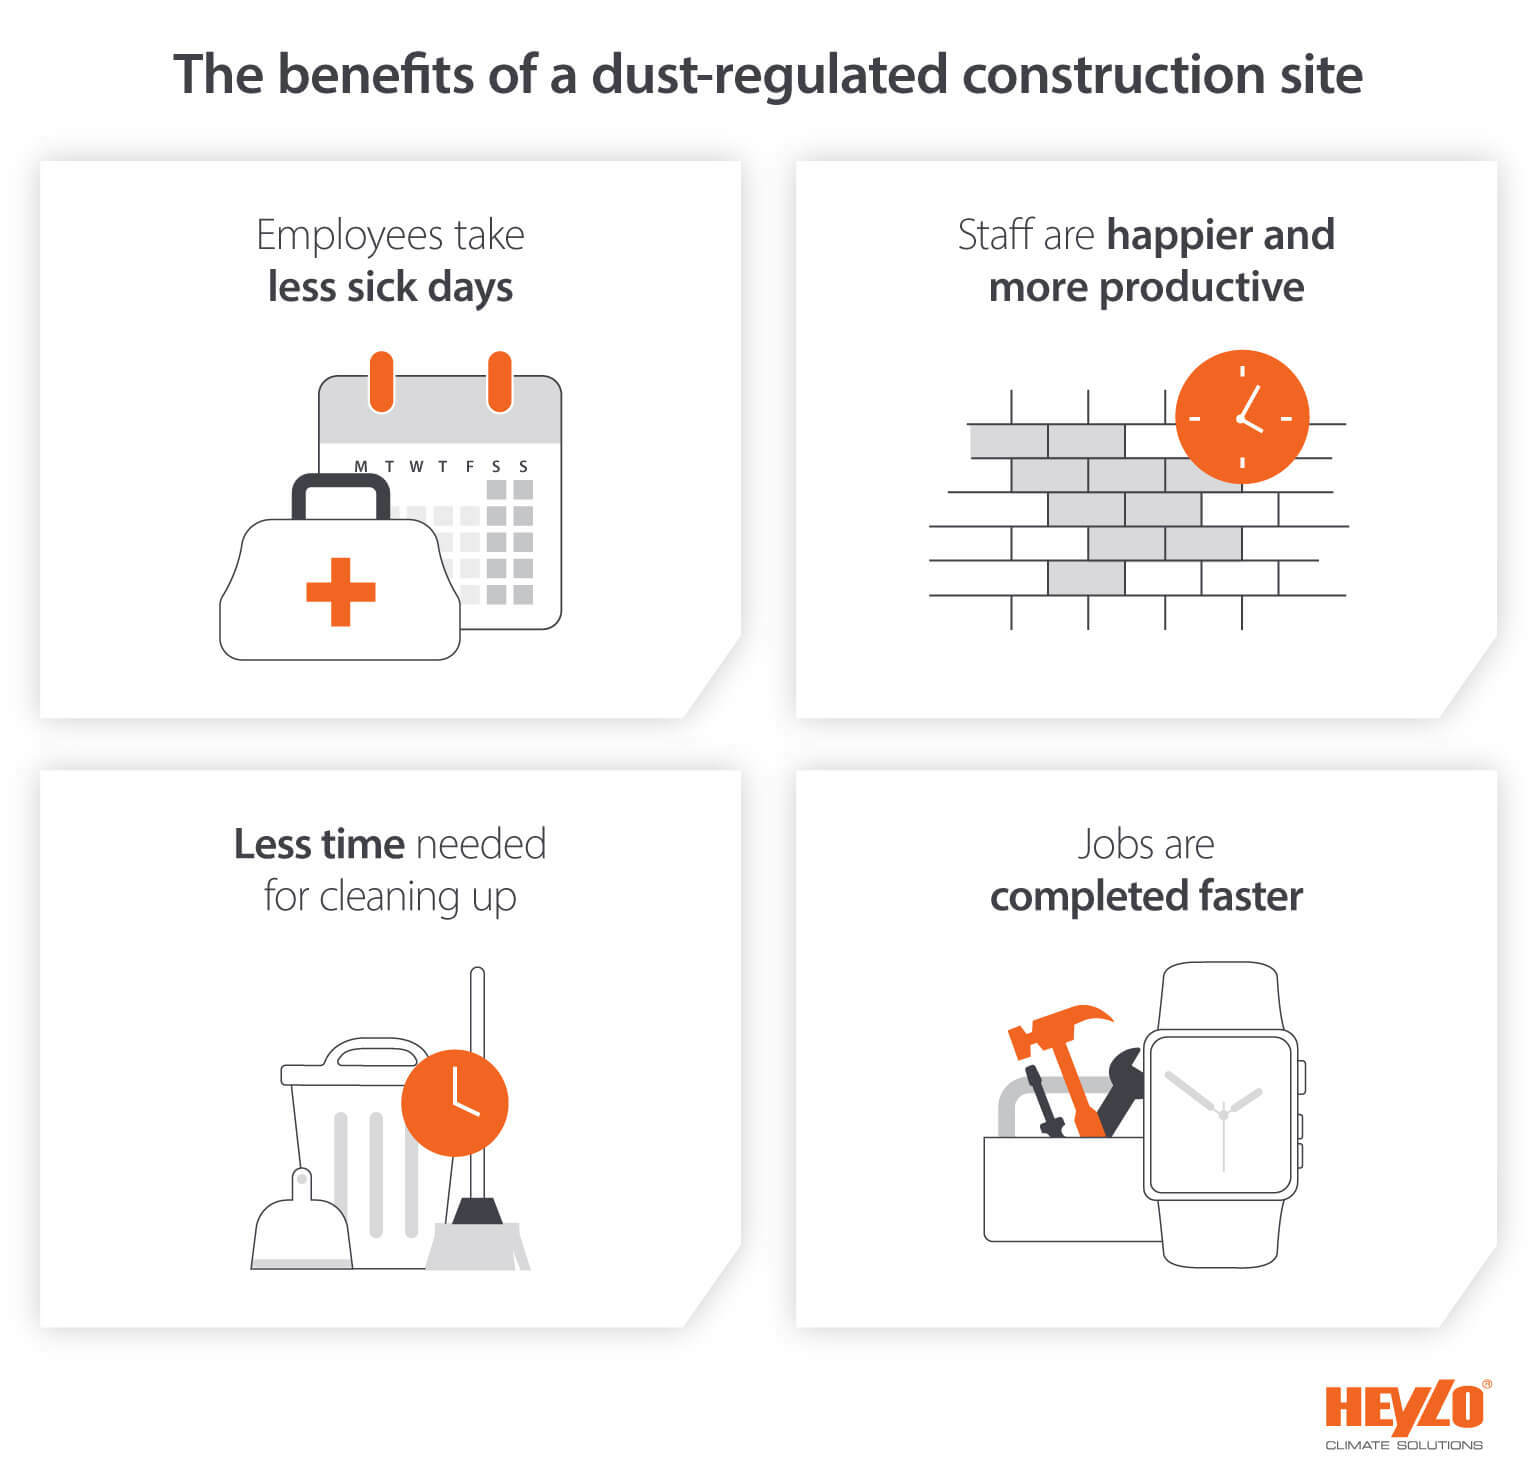 Image showing benefits of controlling construction site dust from worker wellbeing to job efficiency - Infographic